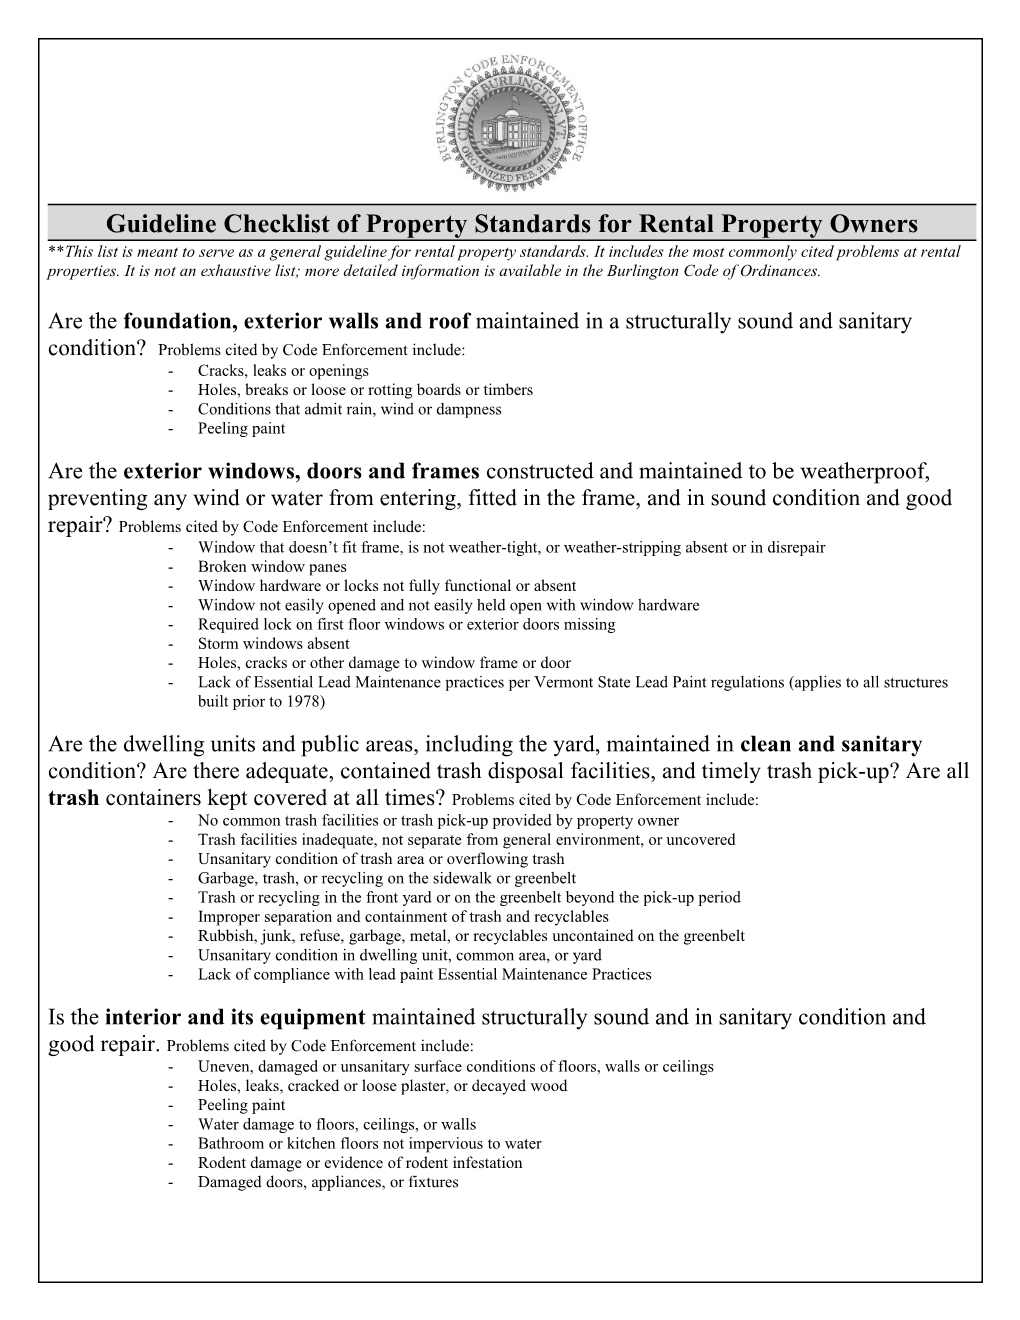 Guideline Checklist of Property Standards for Rental Property Owners